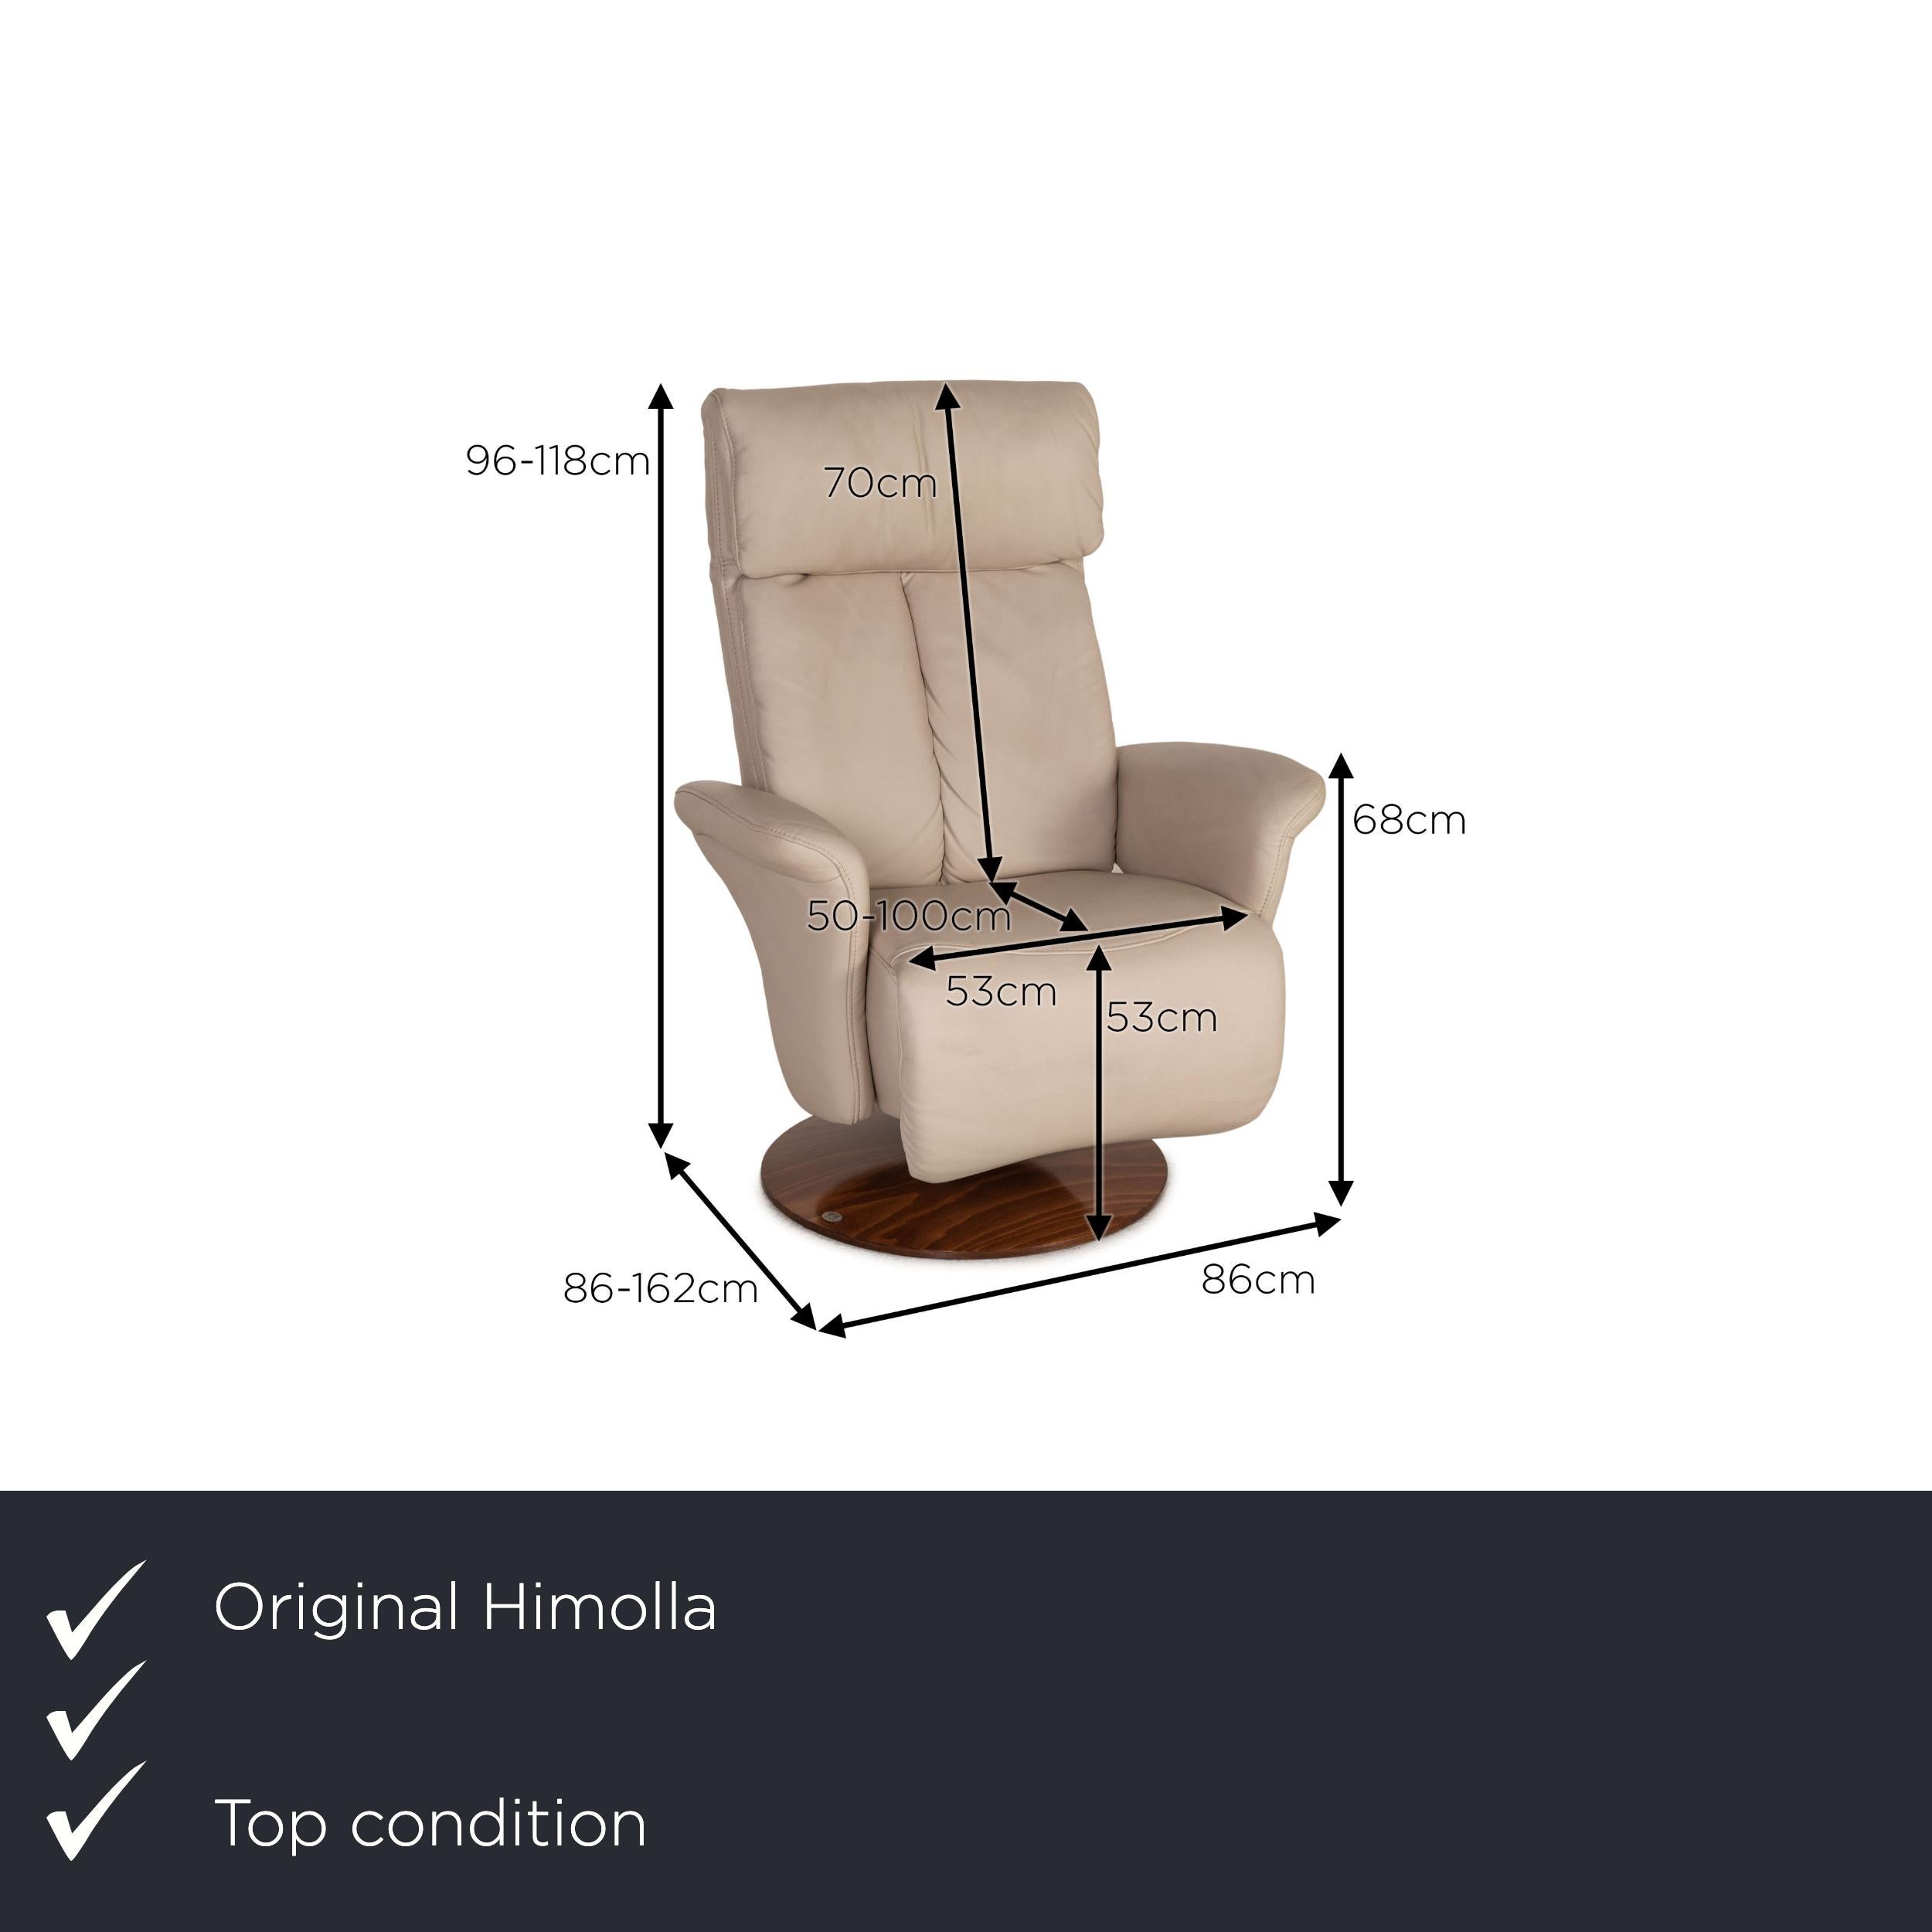 We present to you a Himolla leather armchair cream function relaxation function.

Product measurements in centimeters:

Depth: 86
Width: 86
Height: 96
Seat height: 53
Rest height: 68
Seat depth: 50
Seat width: 53
Back height: 70.

 